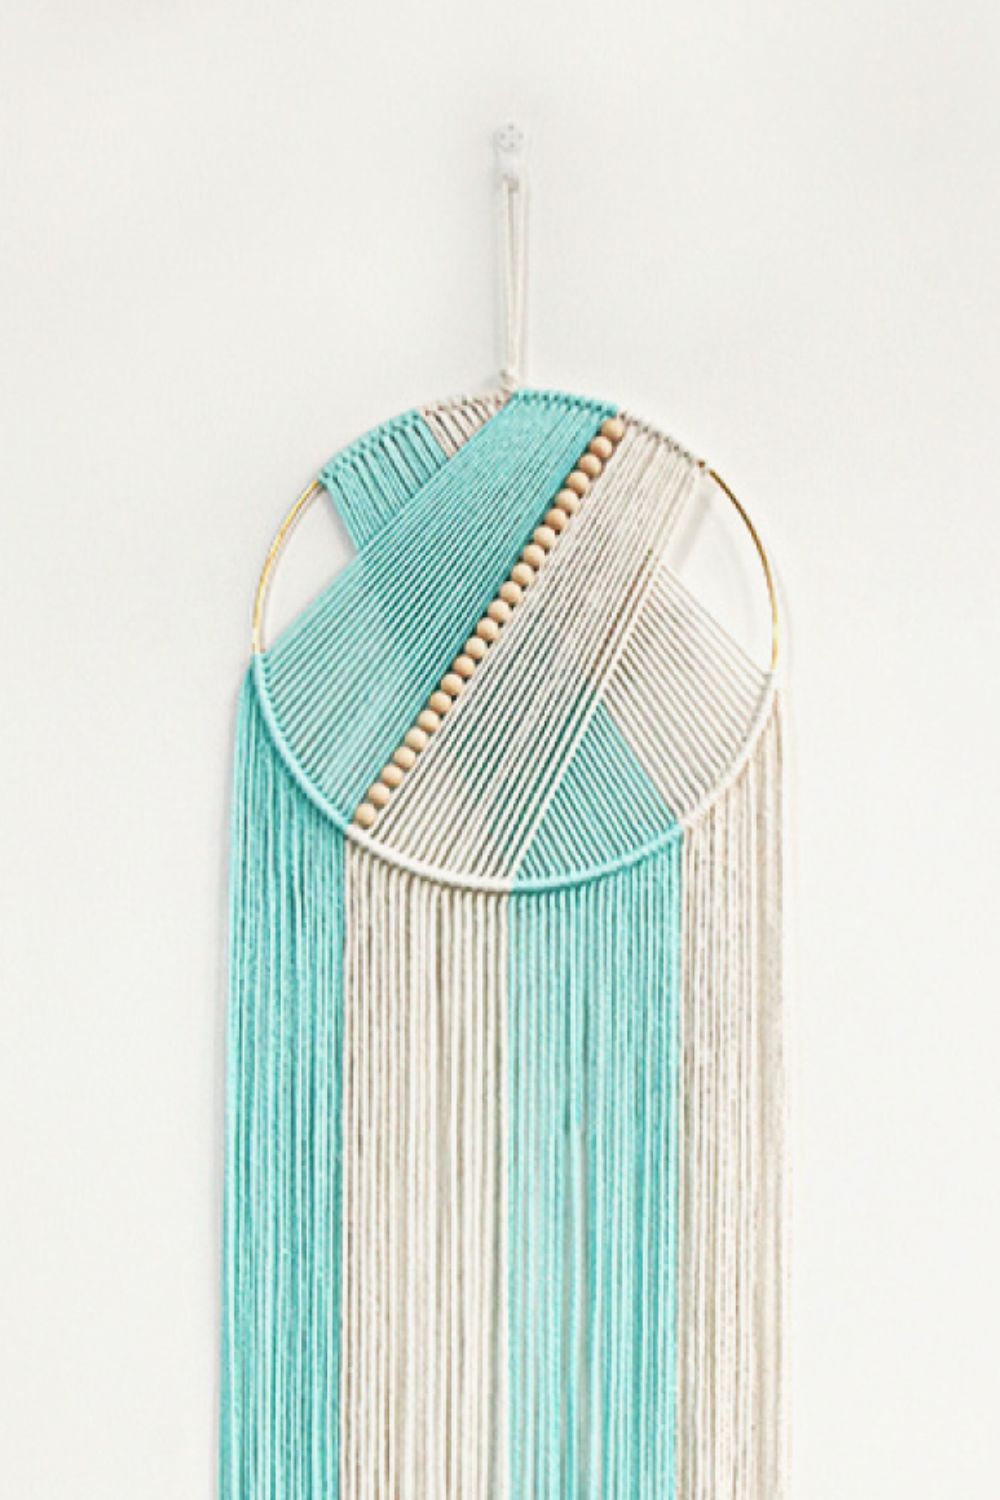 Contrast Macrame Hoop Wall Hanging Print on any thing USA/STOD clothes